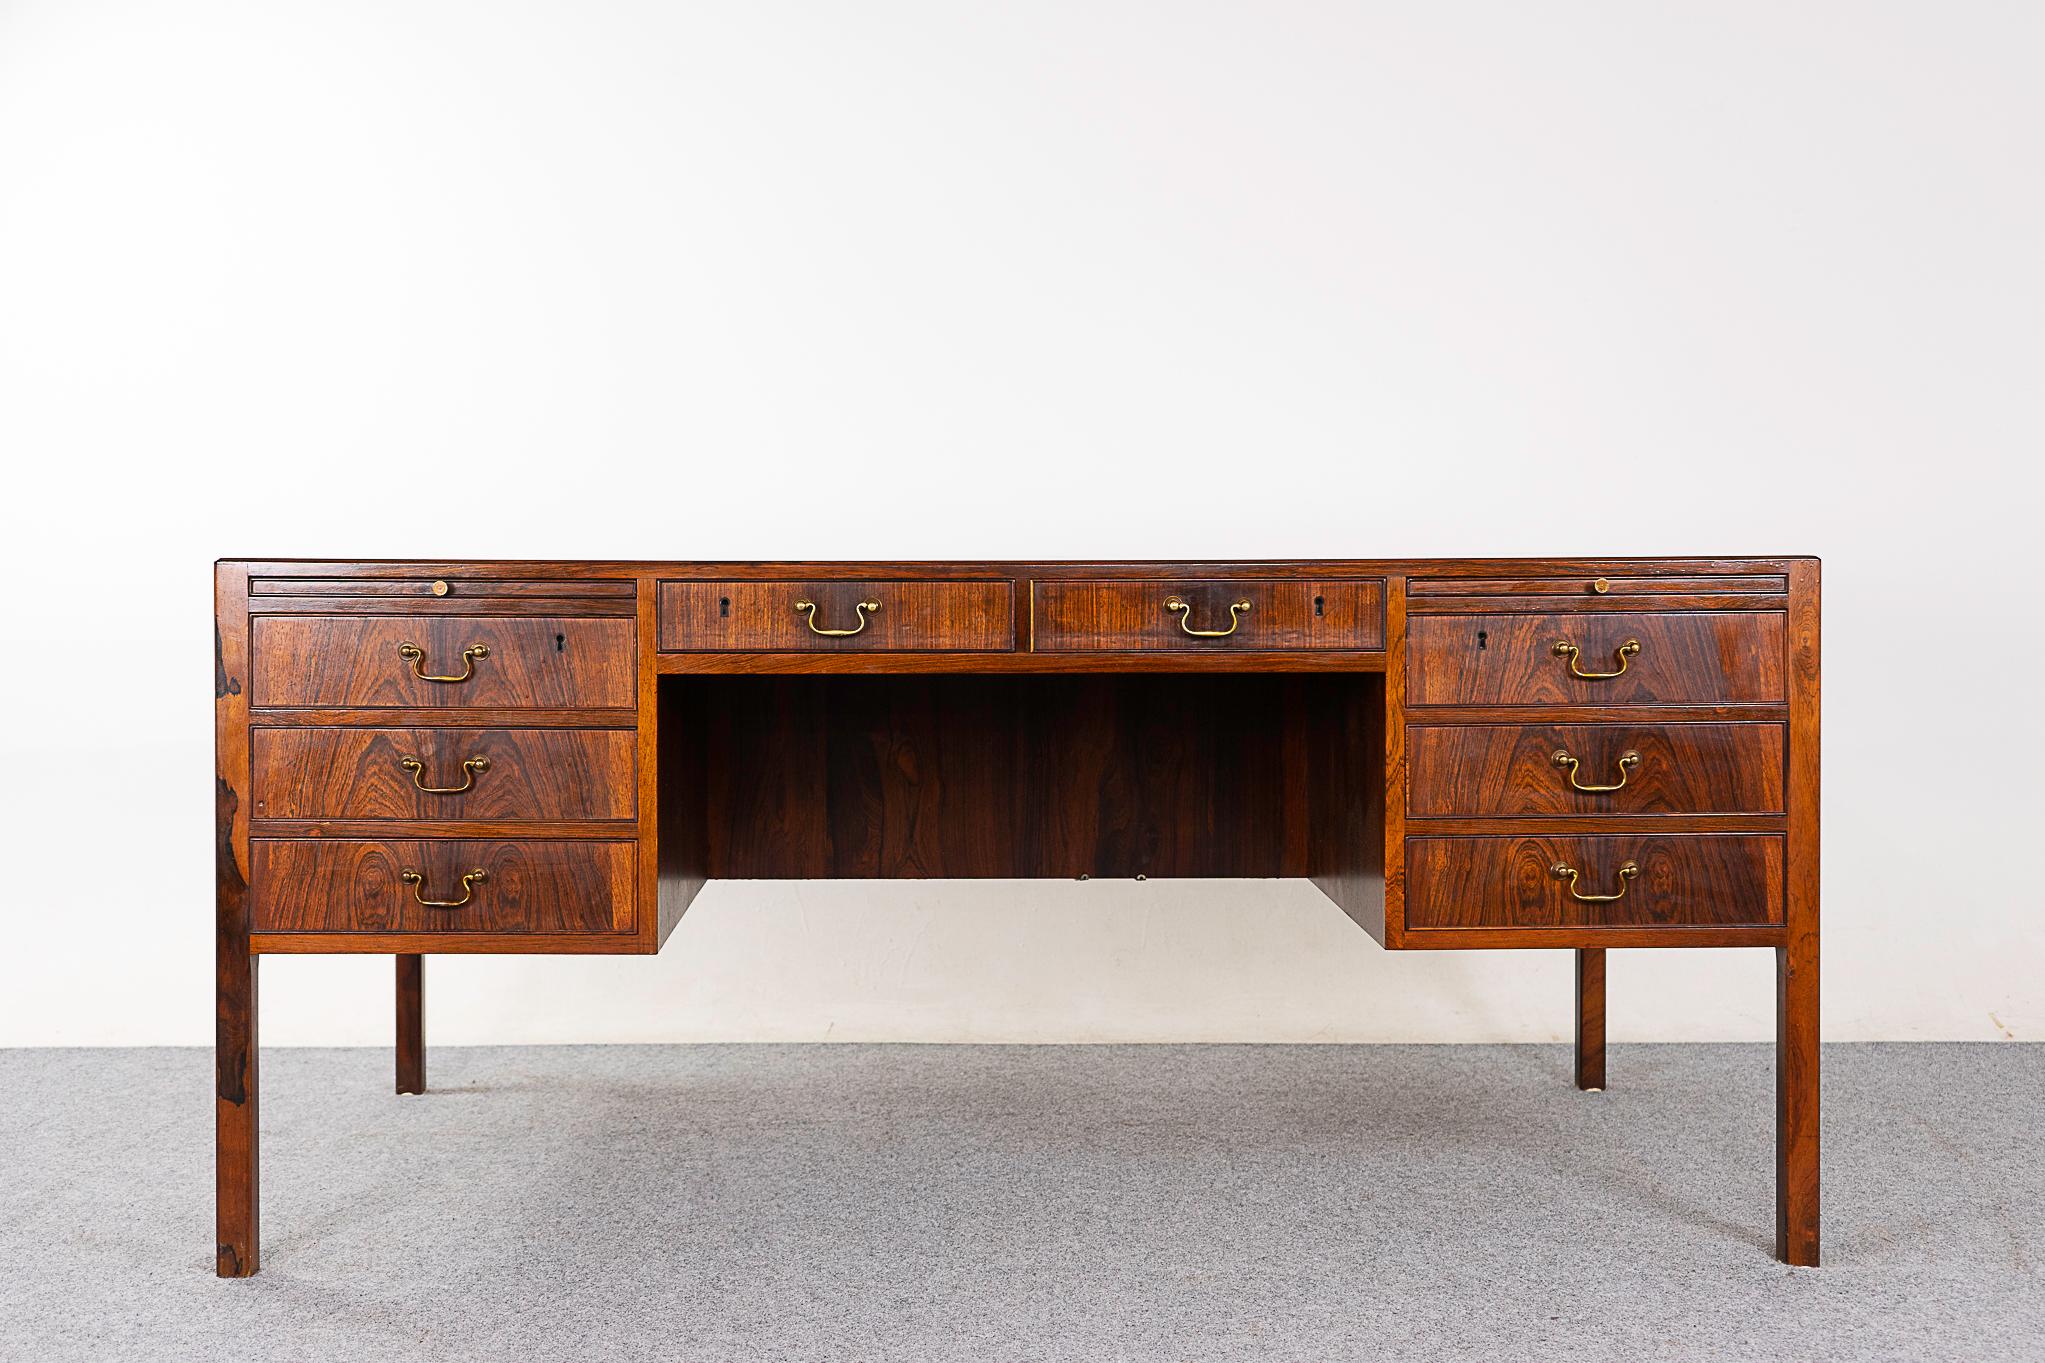 Rosewood mid-century desk by Ole Wanscher, circa 1950's. Exceptional bookmatched veneer top and drawer faces. Darling metal finger pulls and and extending surfaces, open rear bookcase and locking storage drop down compartments. Quality through and